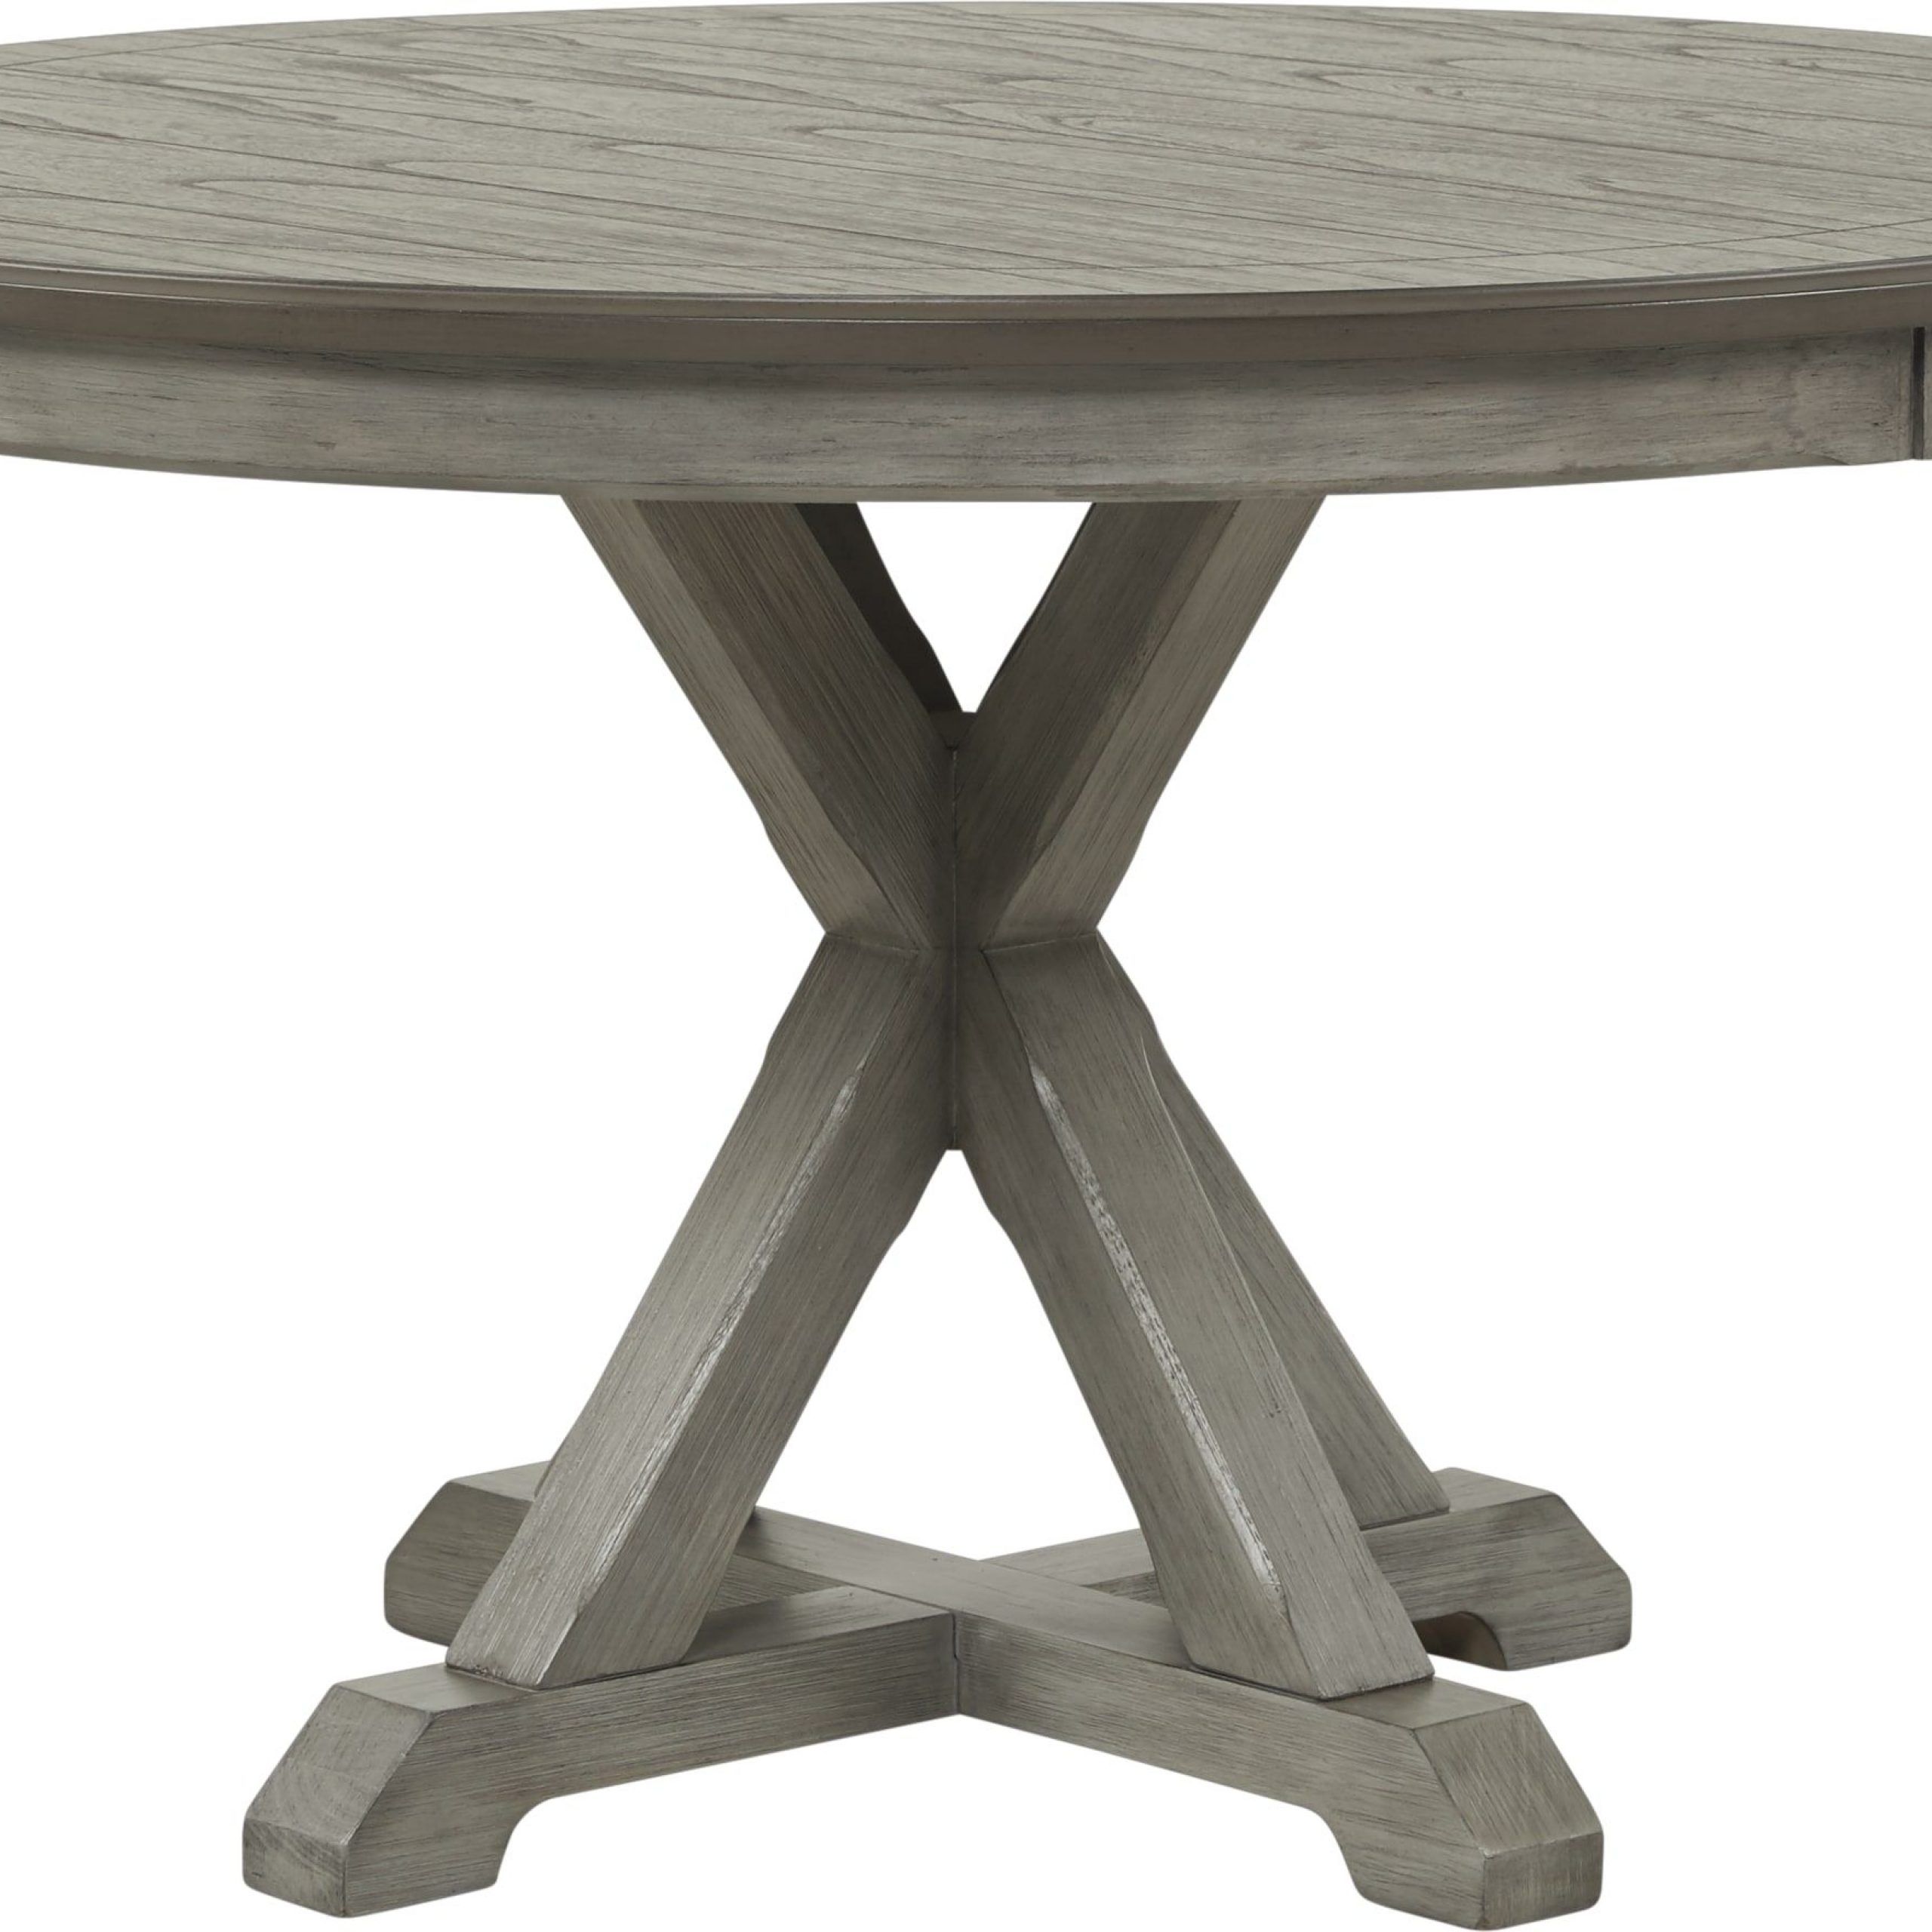 Nantucket Breeze Gray Round Dining Table .399.99. 52Diameter With Regard To Best And Newest Weathered Gray Owen Pedestal Extending Dining Tables (Photo 6 of 25)